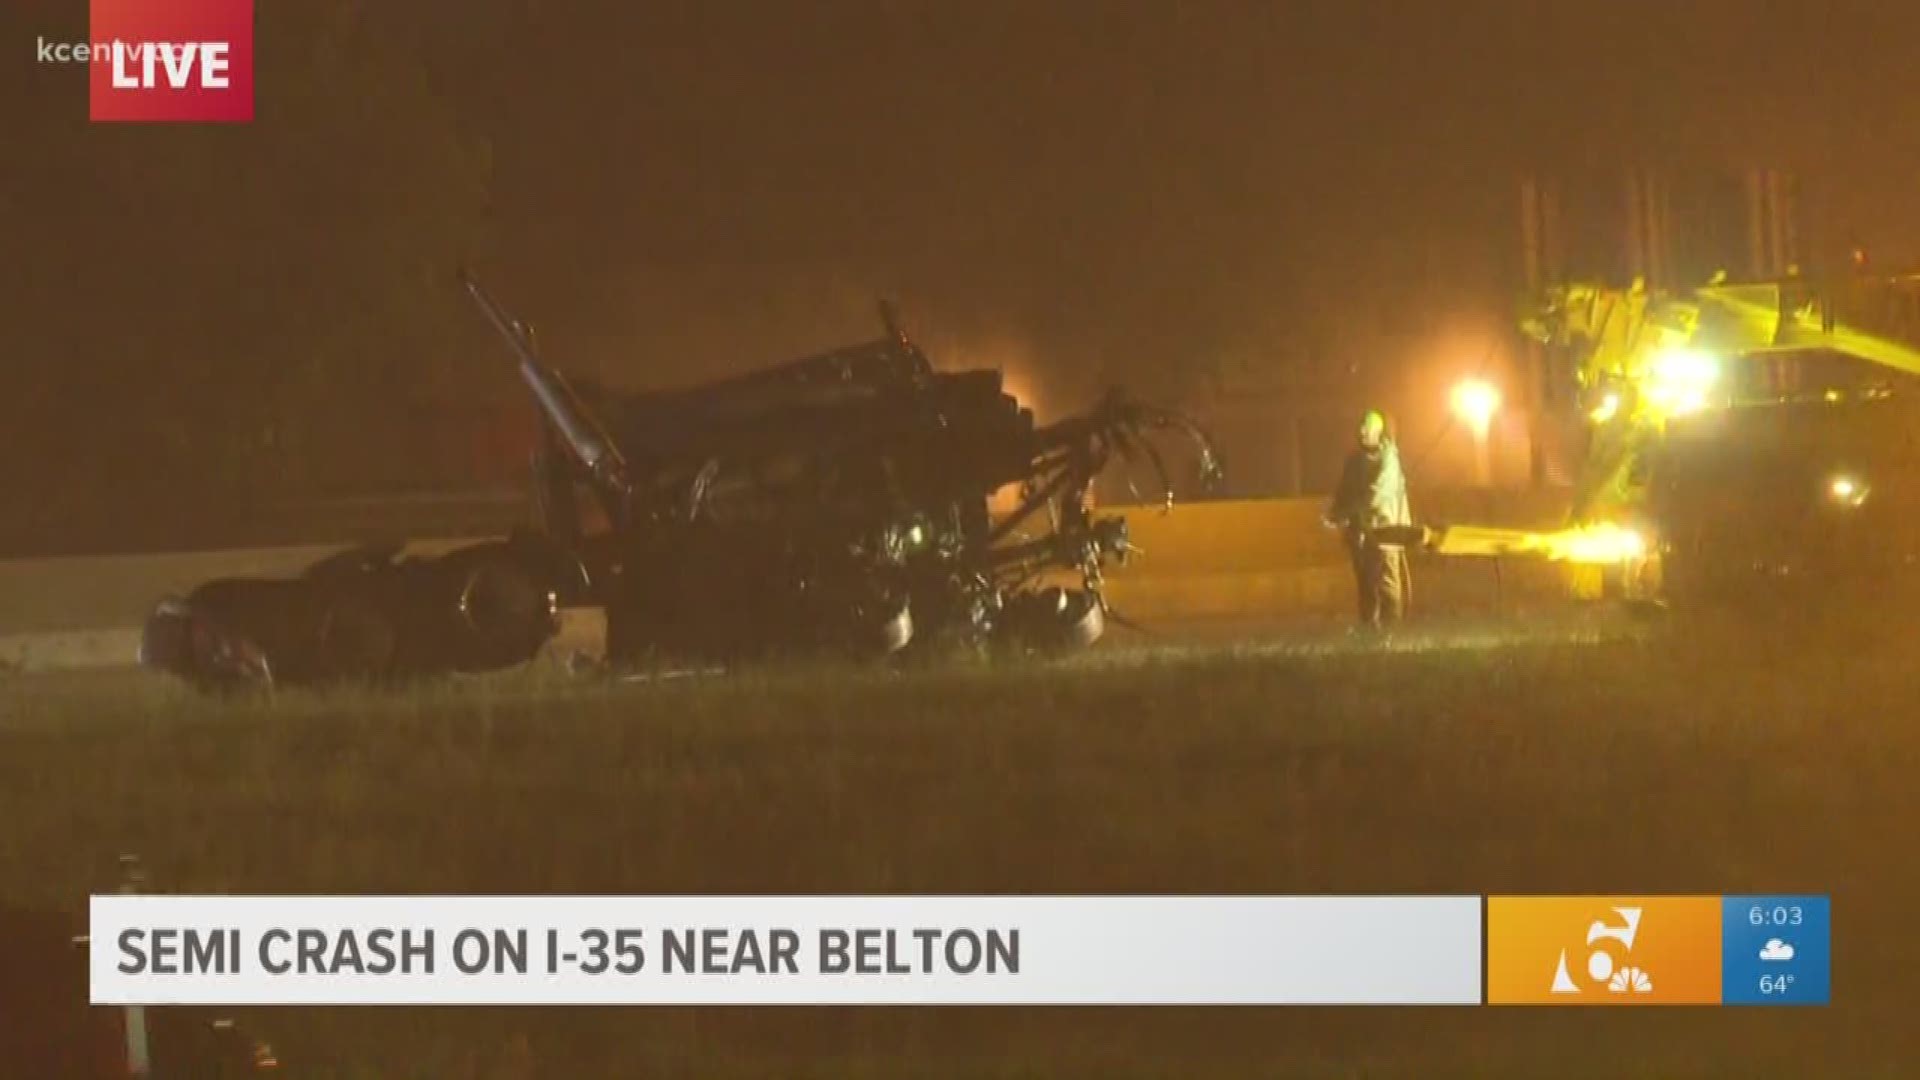 A semi-truck rollover on SB I-35 near Exit 293B in Belton has shut down the area and is causing delays. No injuries were reported but officials are working to clear the scene.